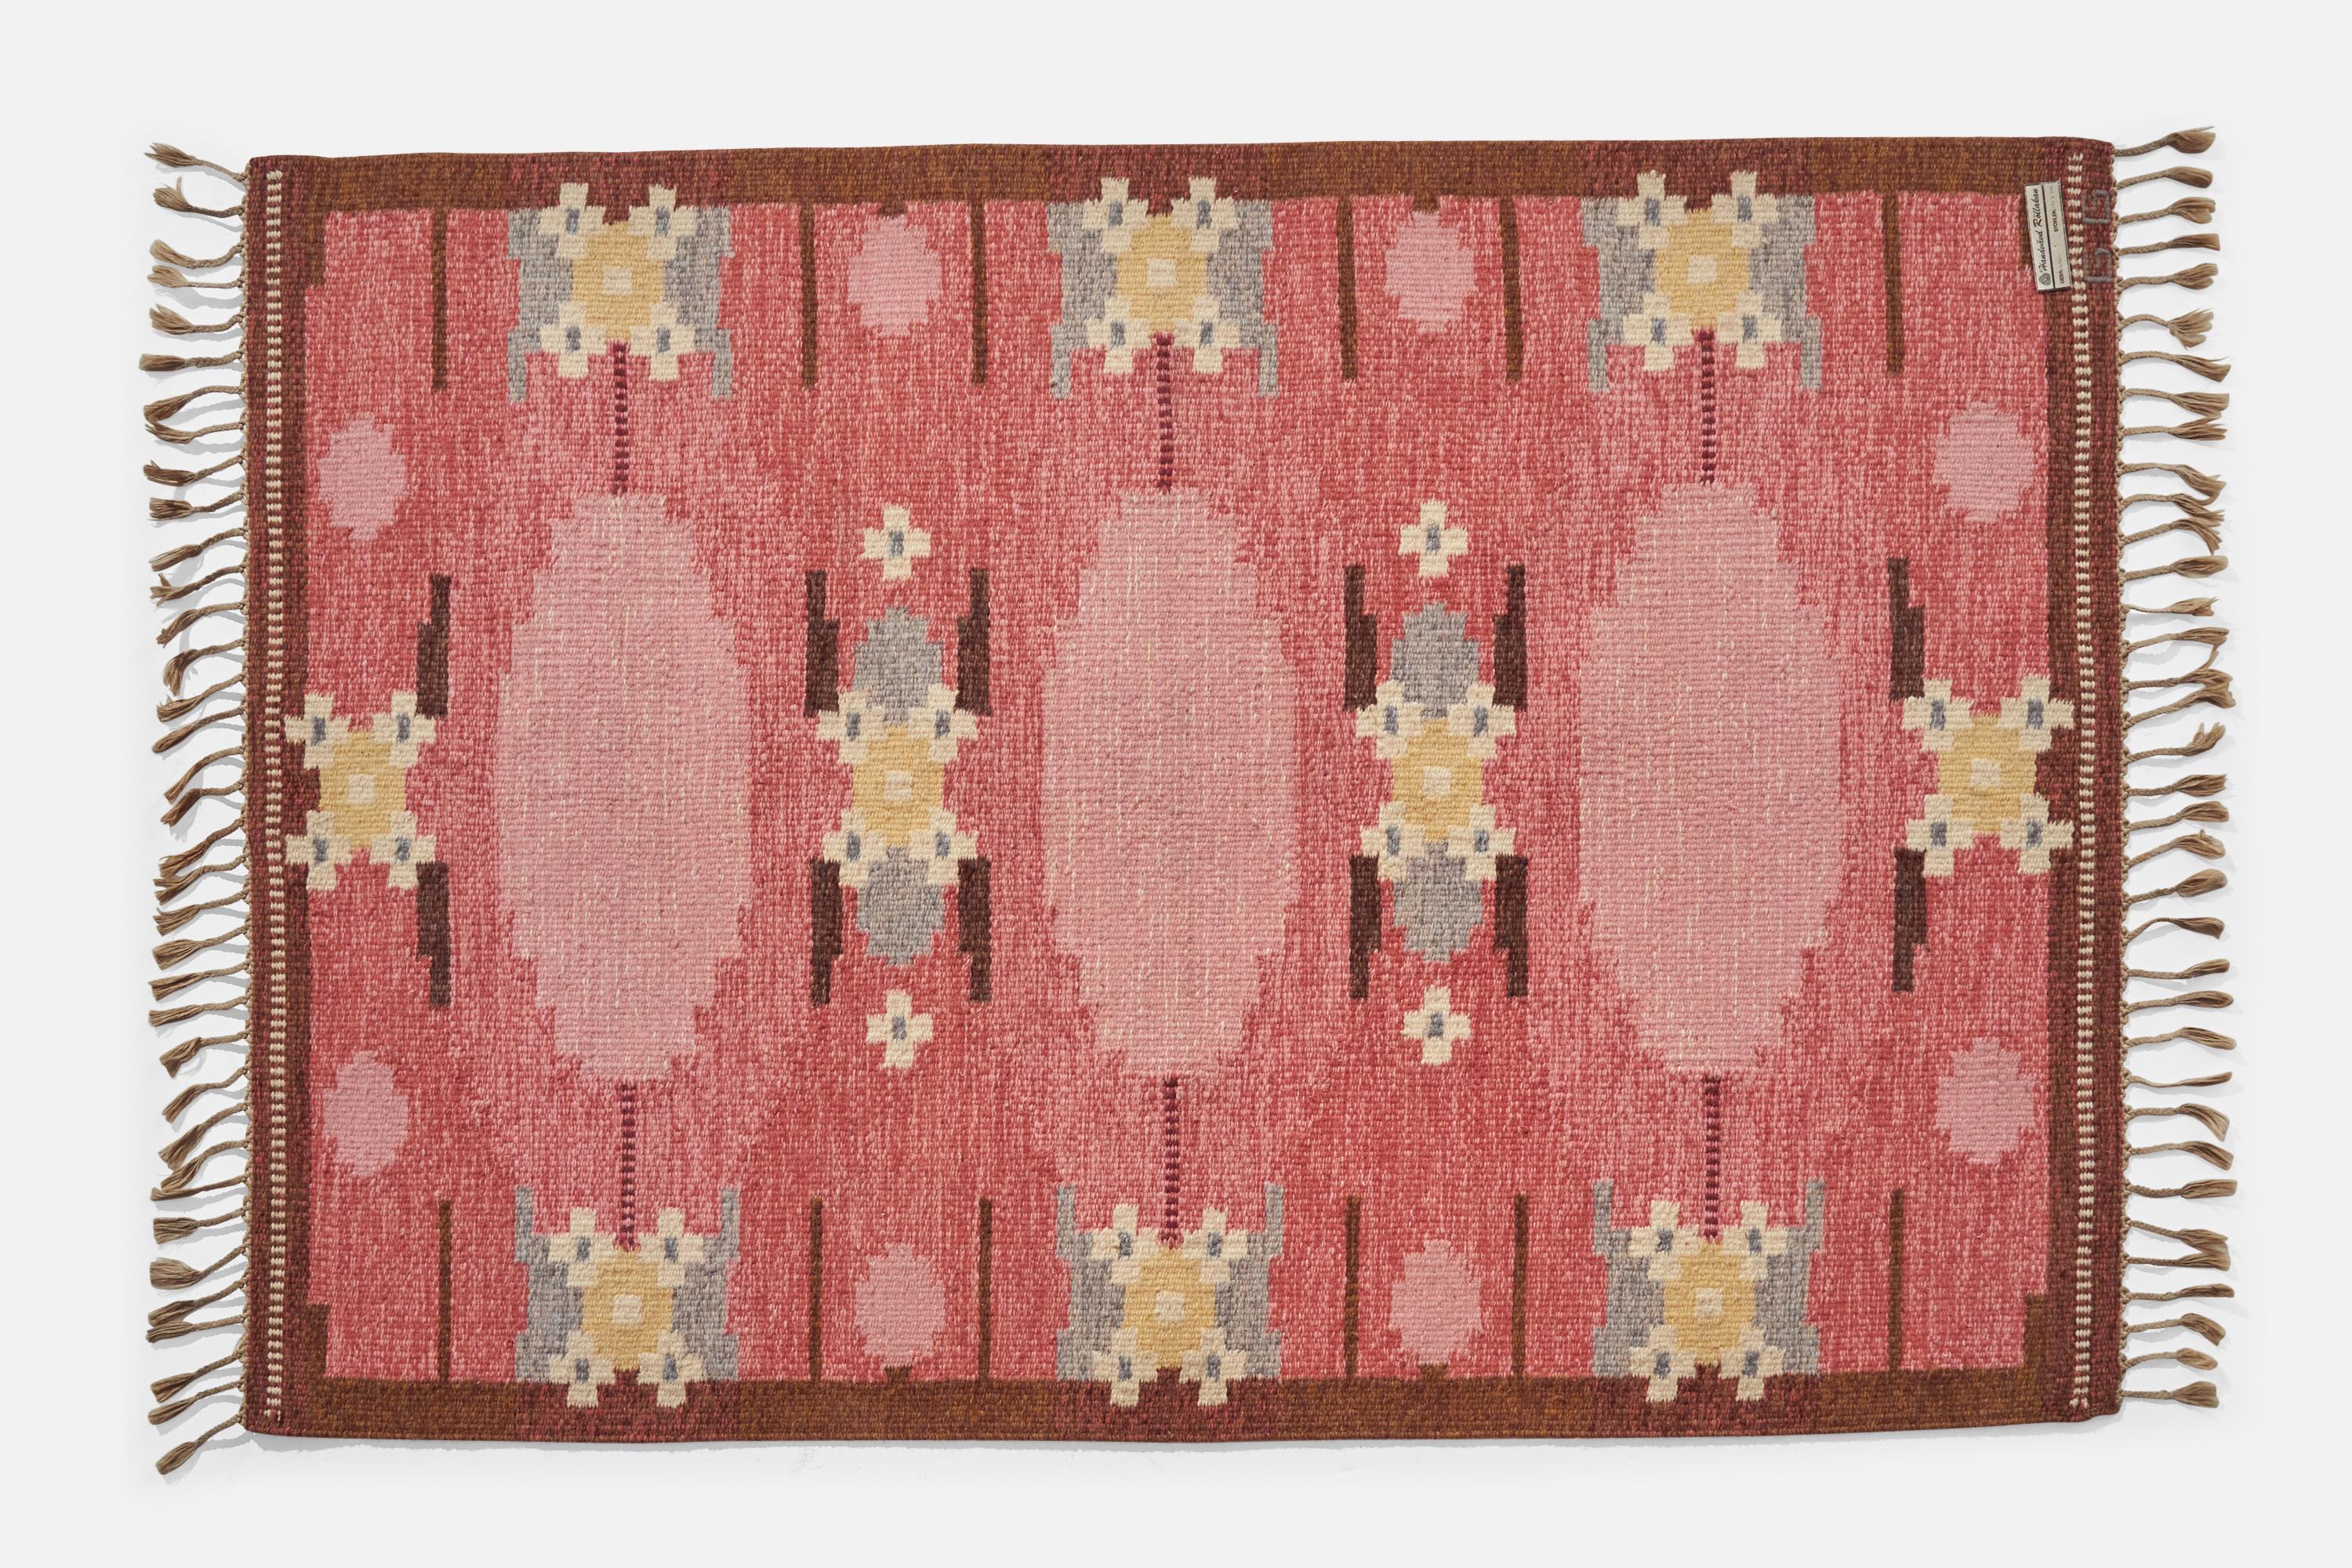 A pink, brown and yellow flat-weave wool carpet designed and produced by Gitt Grännsjö-Carlsson, Sweden, c. 1950s.